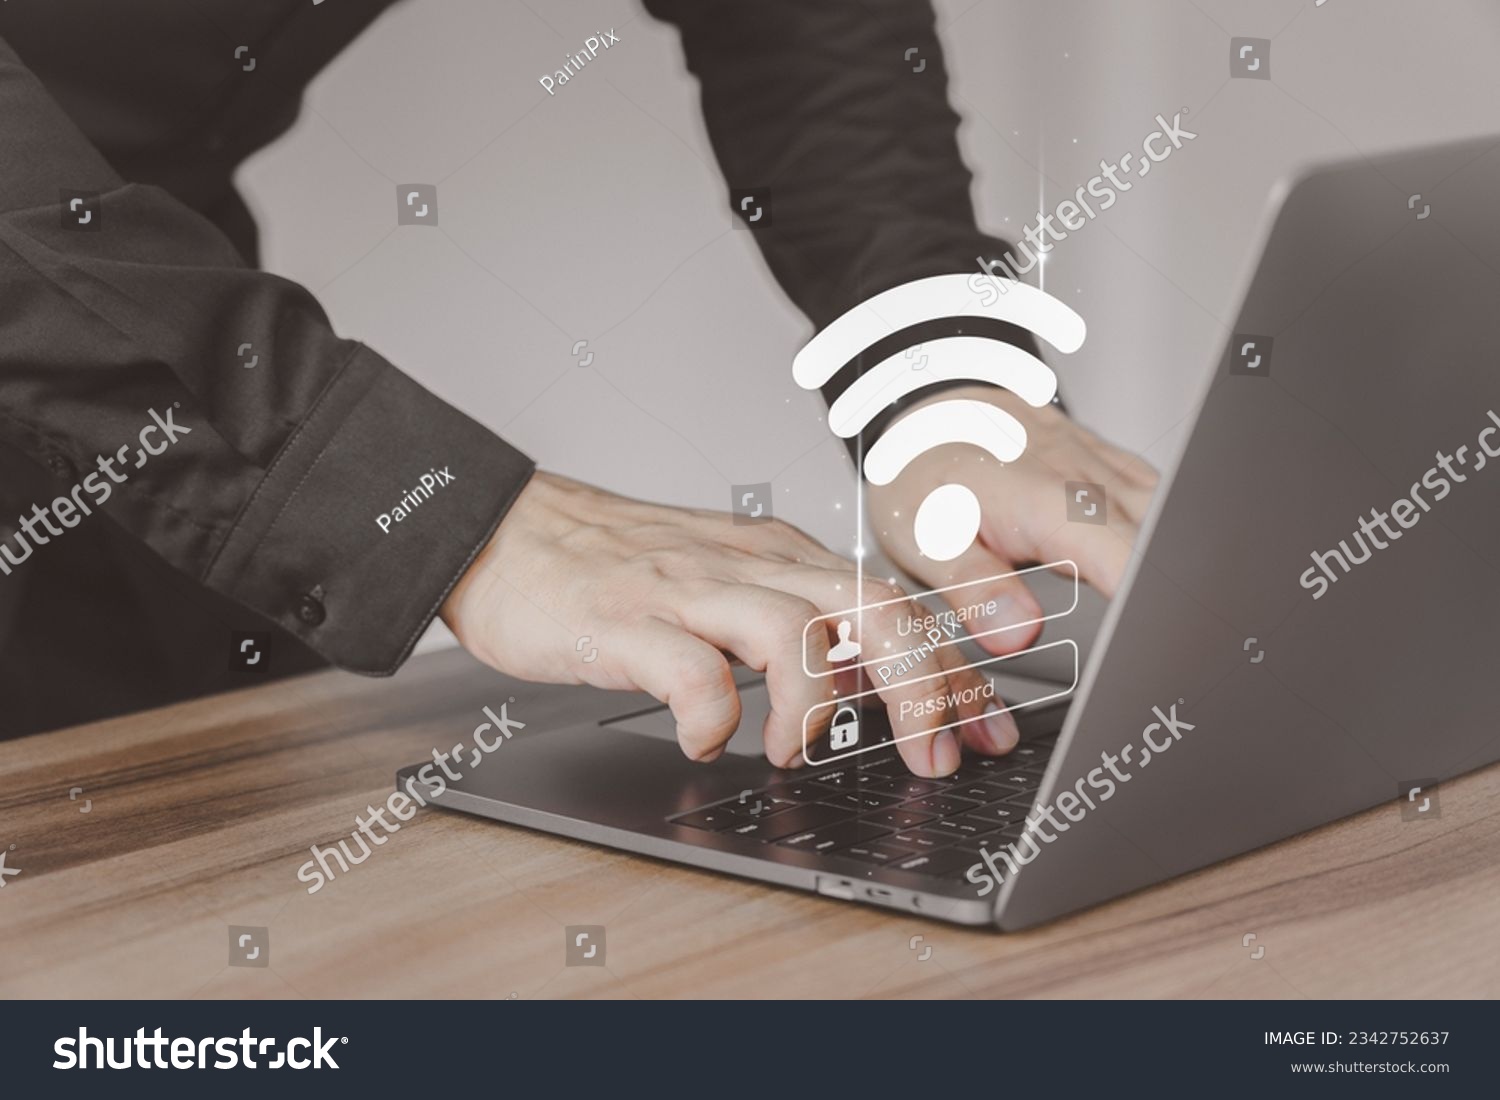 User use a computer laptop for a login password to wifi but wifi is not connected. Explore the seamless world of technology as user log in to WiFi. Concept technology of waiting to connect to wifi. #2342752637